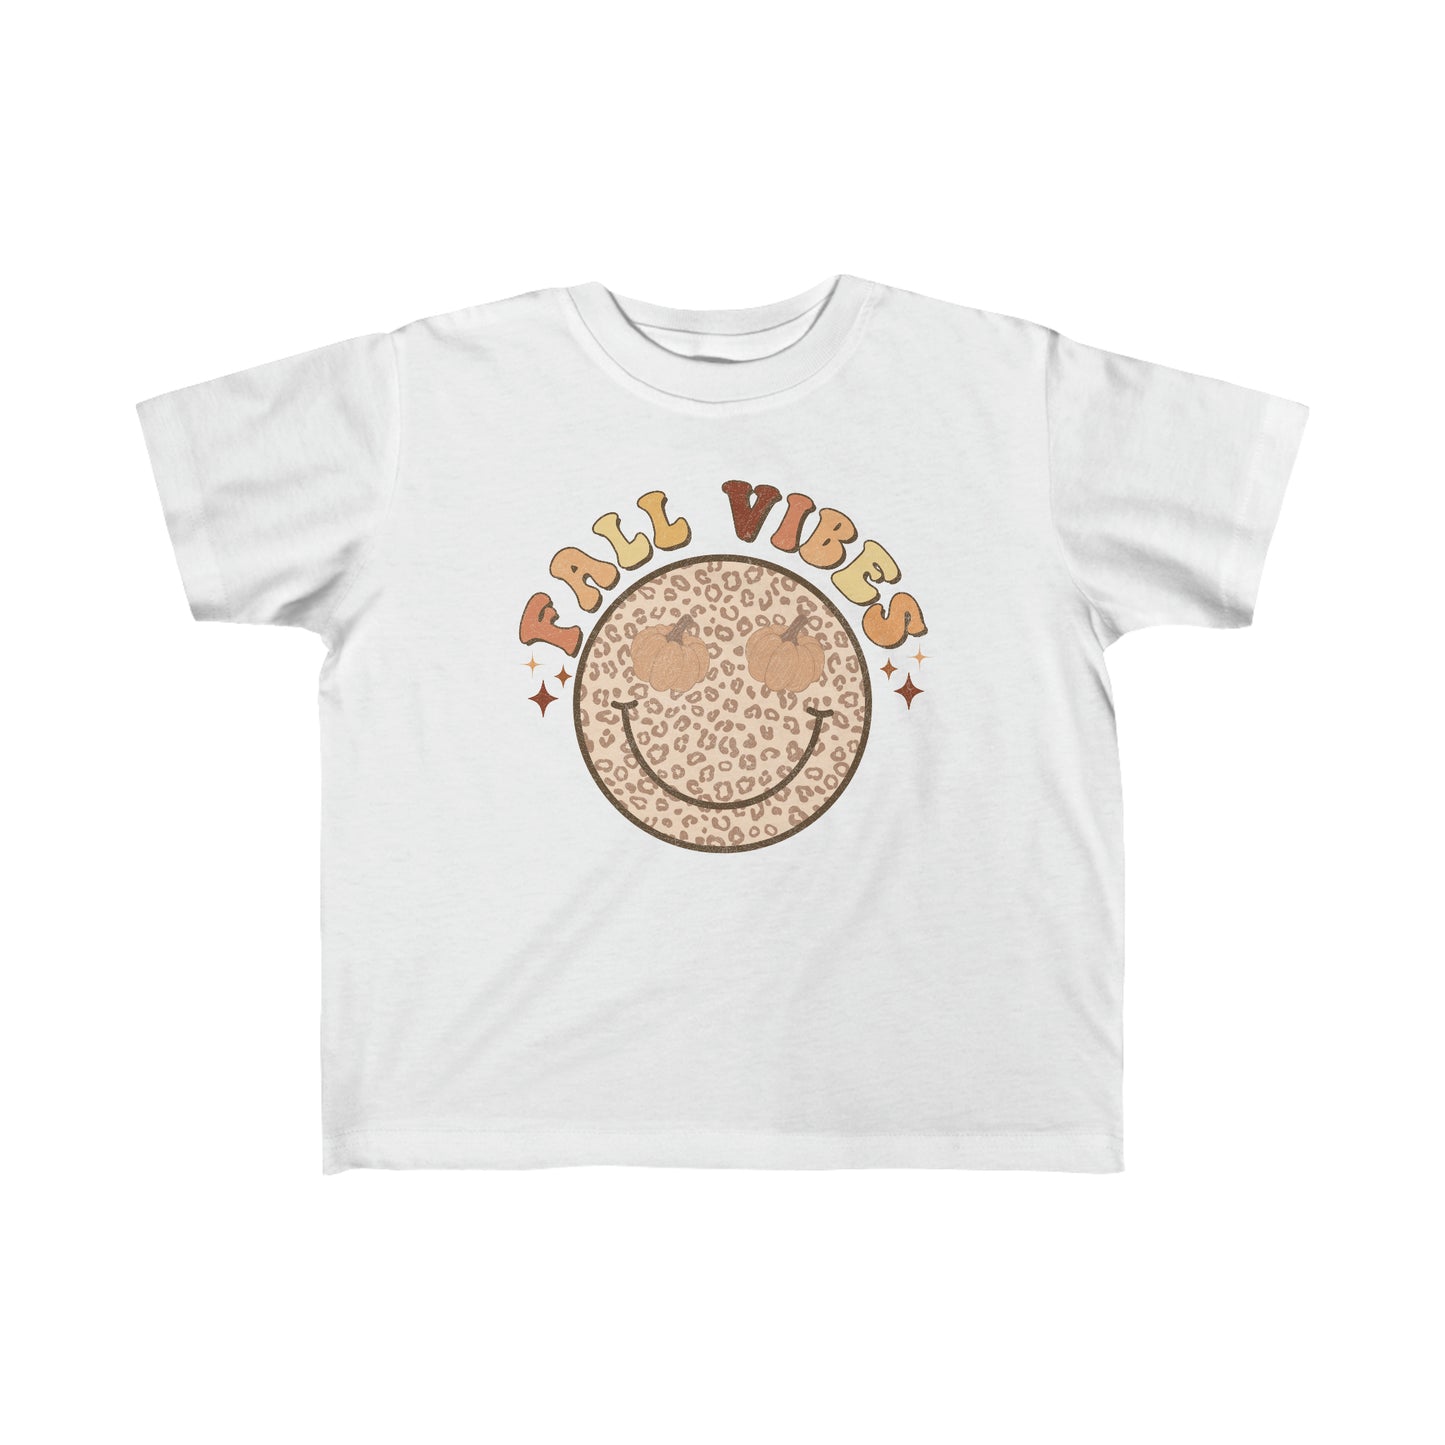 Retro Fall Vibes Toddler's Fine Jersey Tee